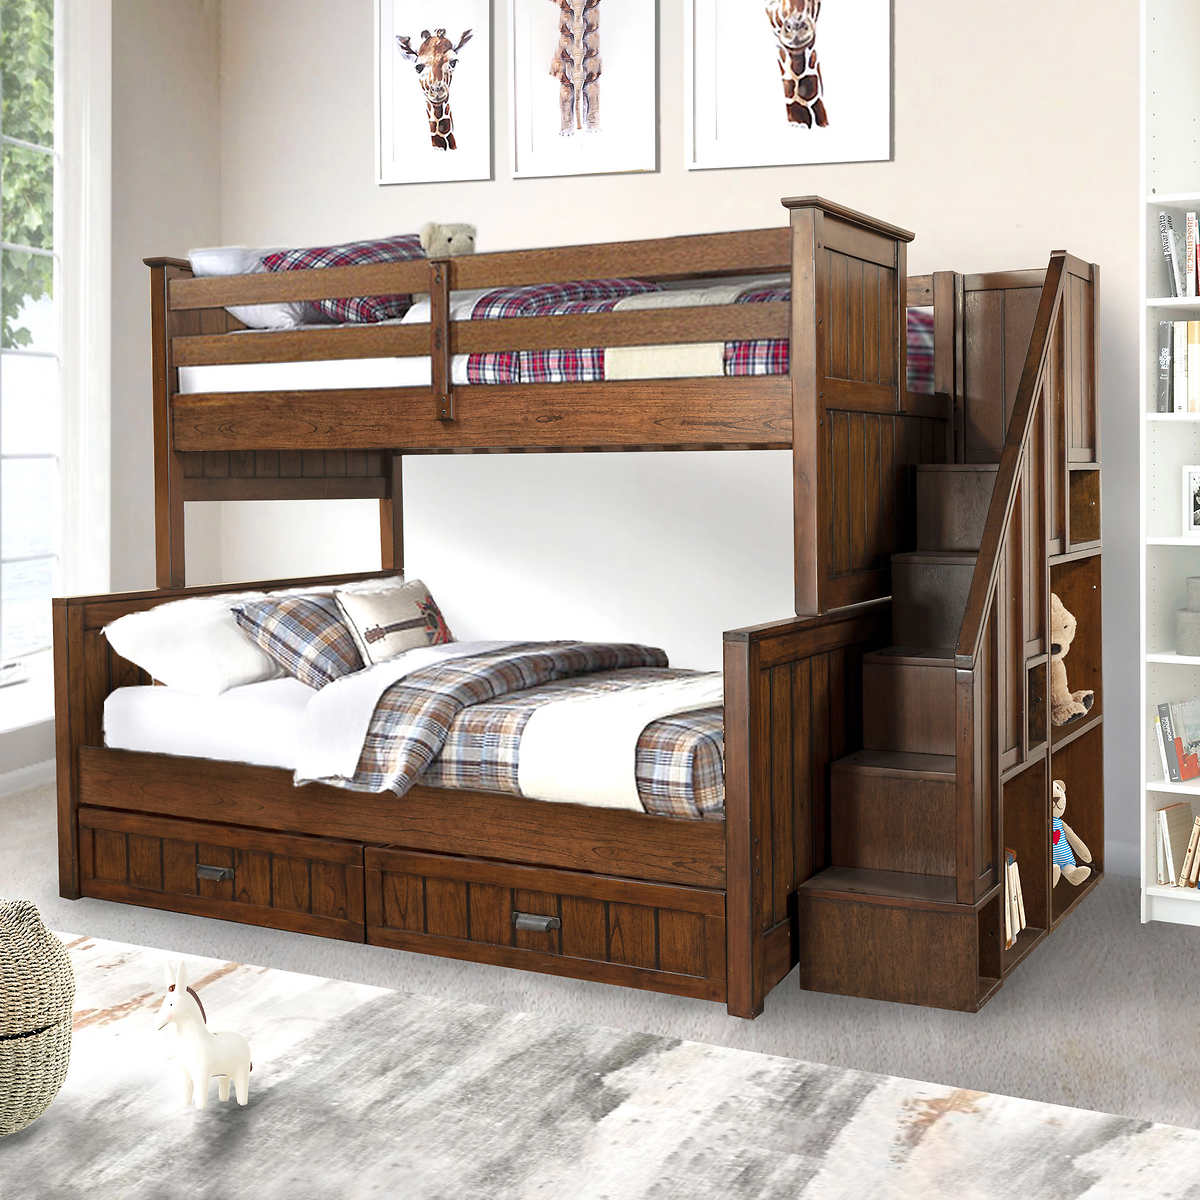 Maddox Twin Over Double Bunk Bed Costco, Bunk Beds Bunk Beds